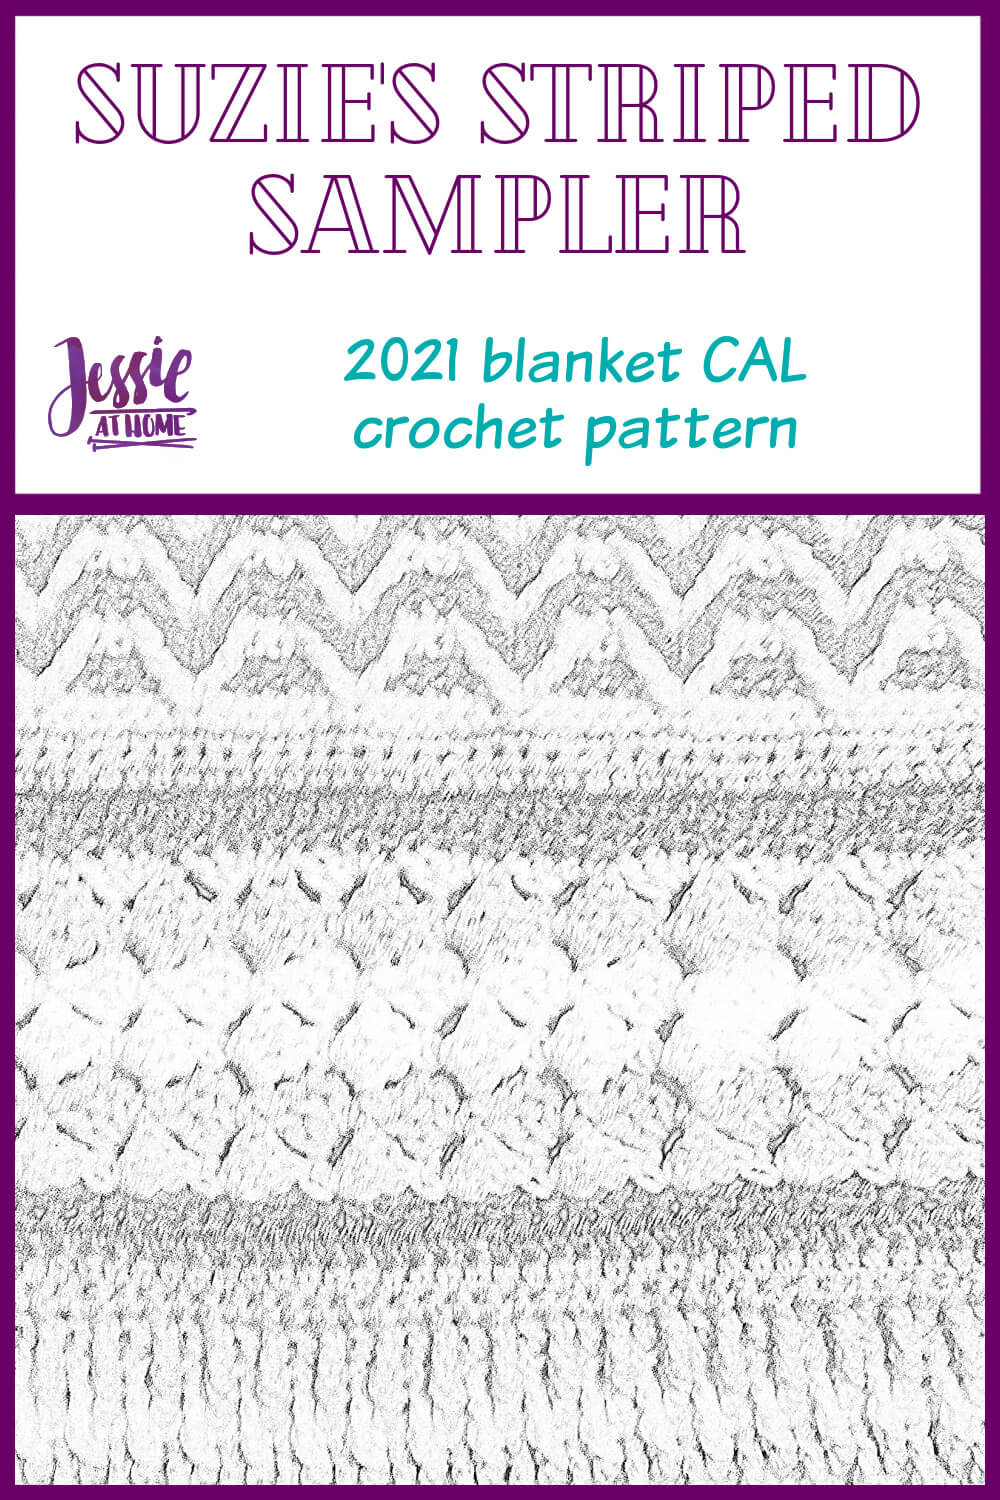 Suzie's Striped Sampler 2021 Blanket CAL by Jessie At Home - Pin 1